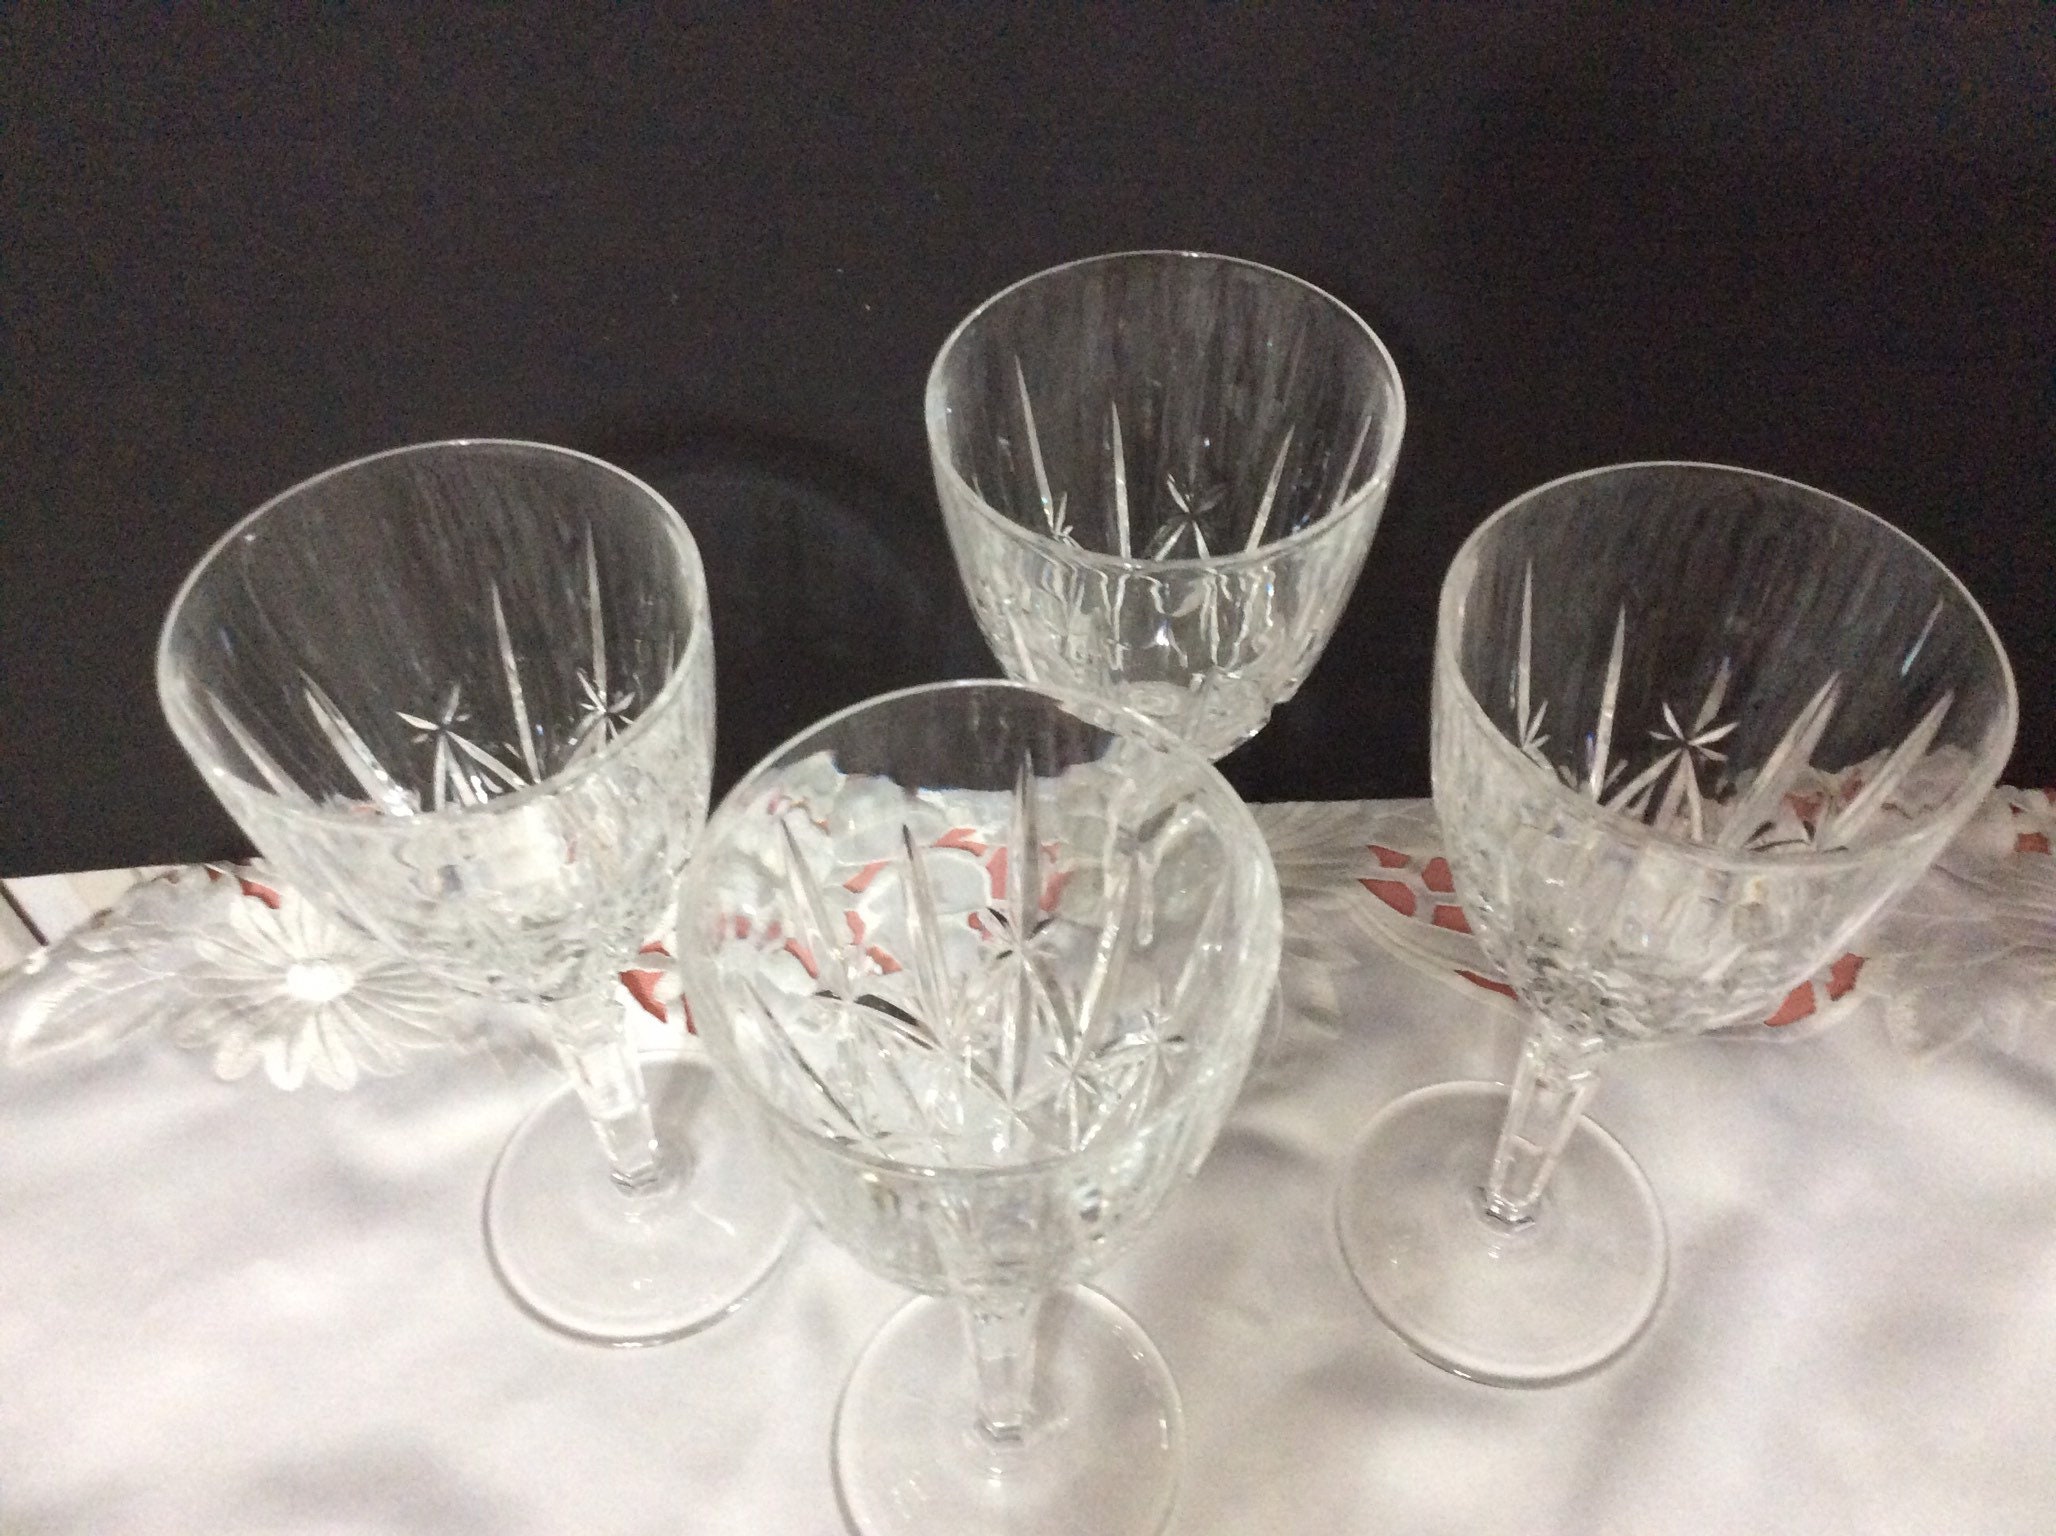 Stace Red Wine Glasses Set of 4 - Premium Crystal Glasses - Italian Style  Bordeaux Wine Glass - Great Gift Packaging